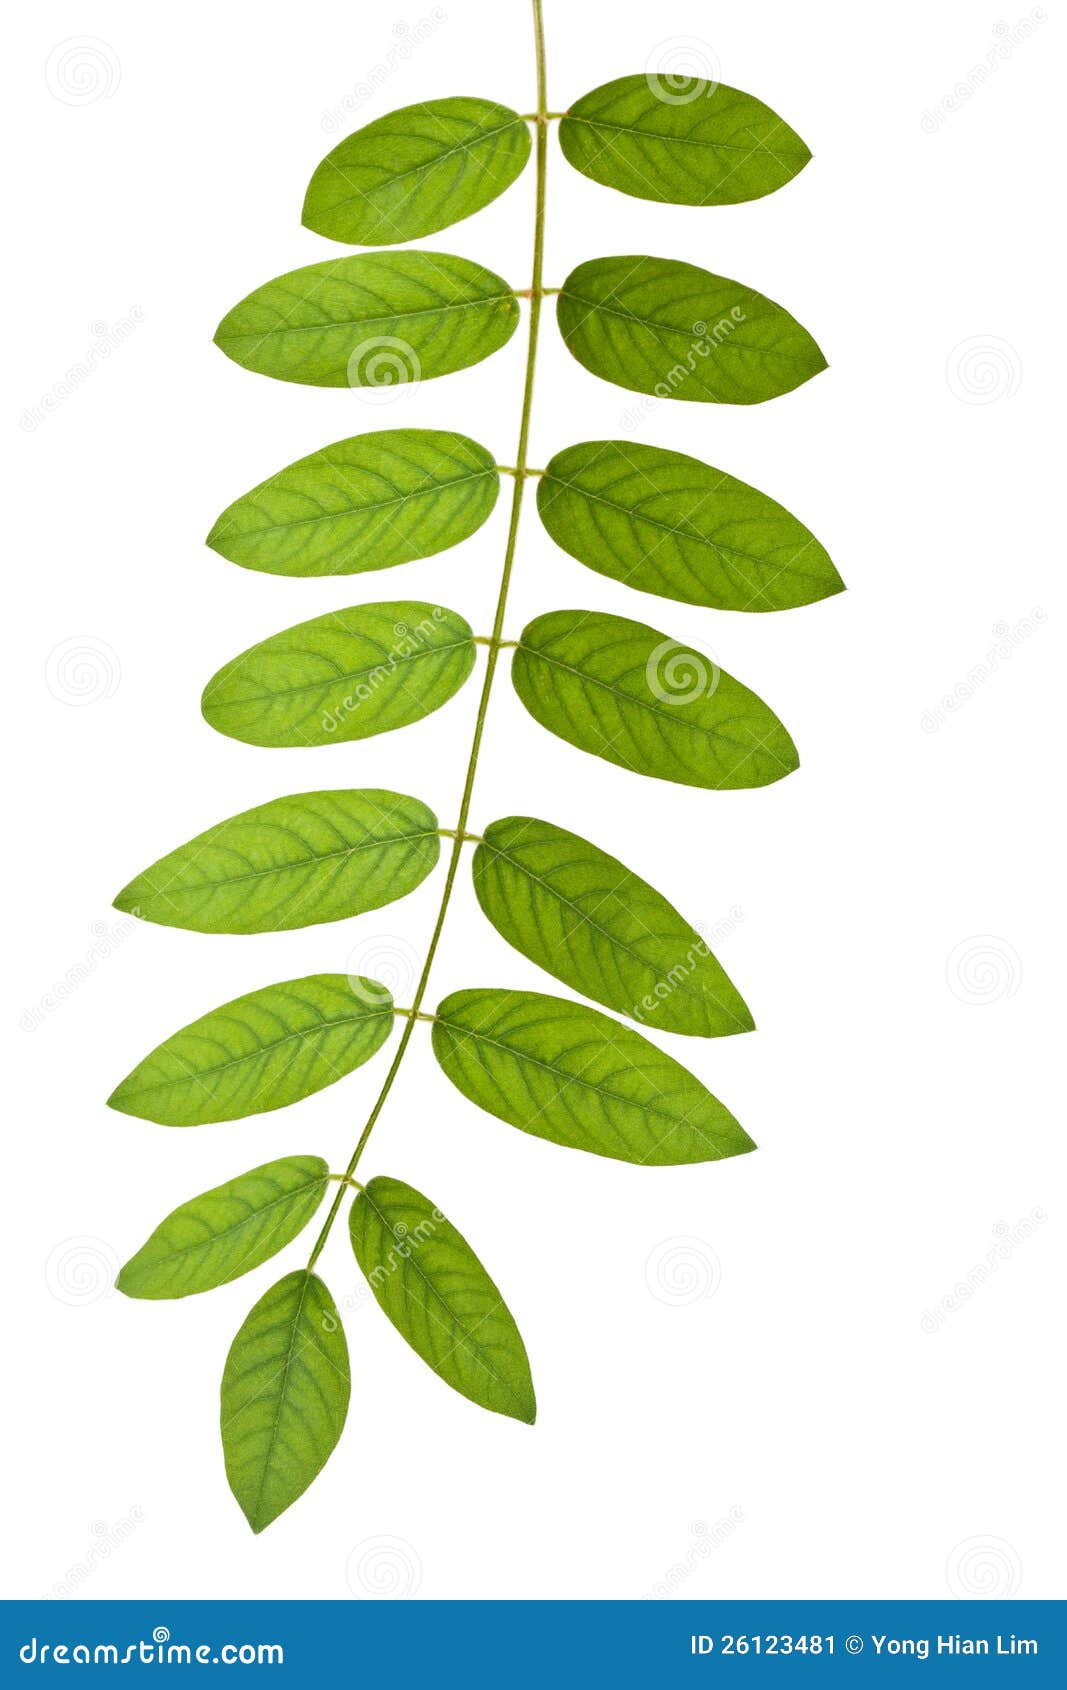 Stem with green leaves stock image. Image of stalk, foliage - 26123481